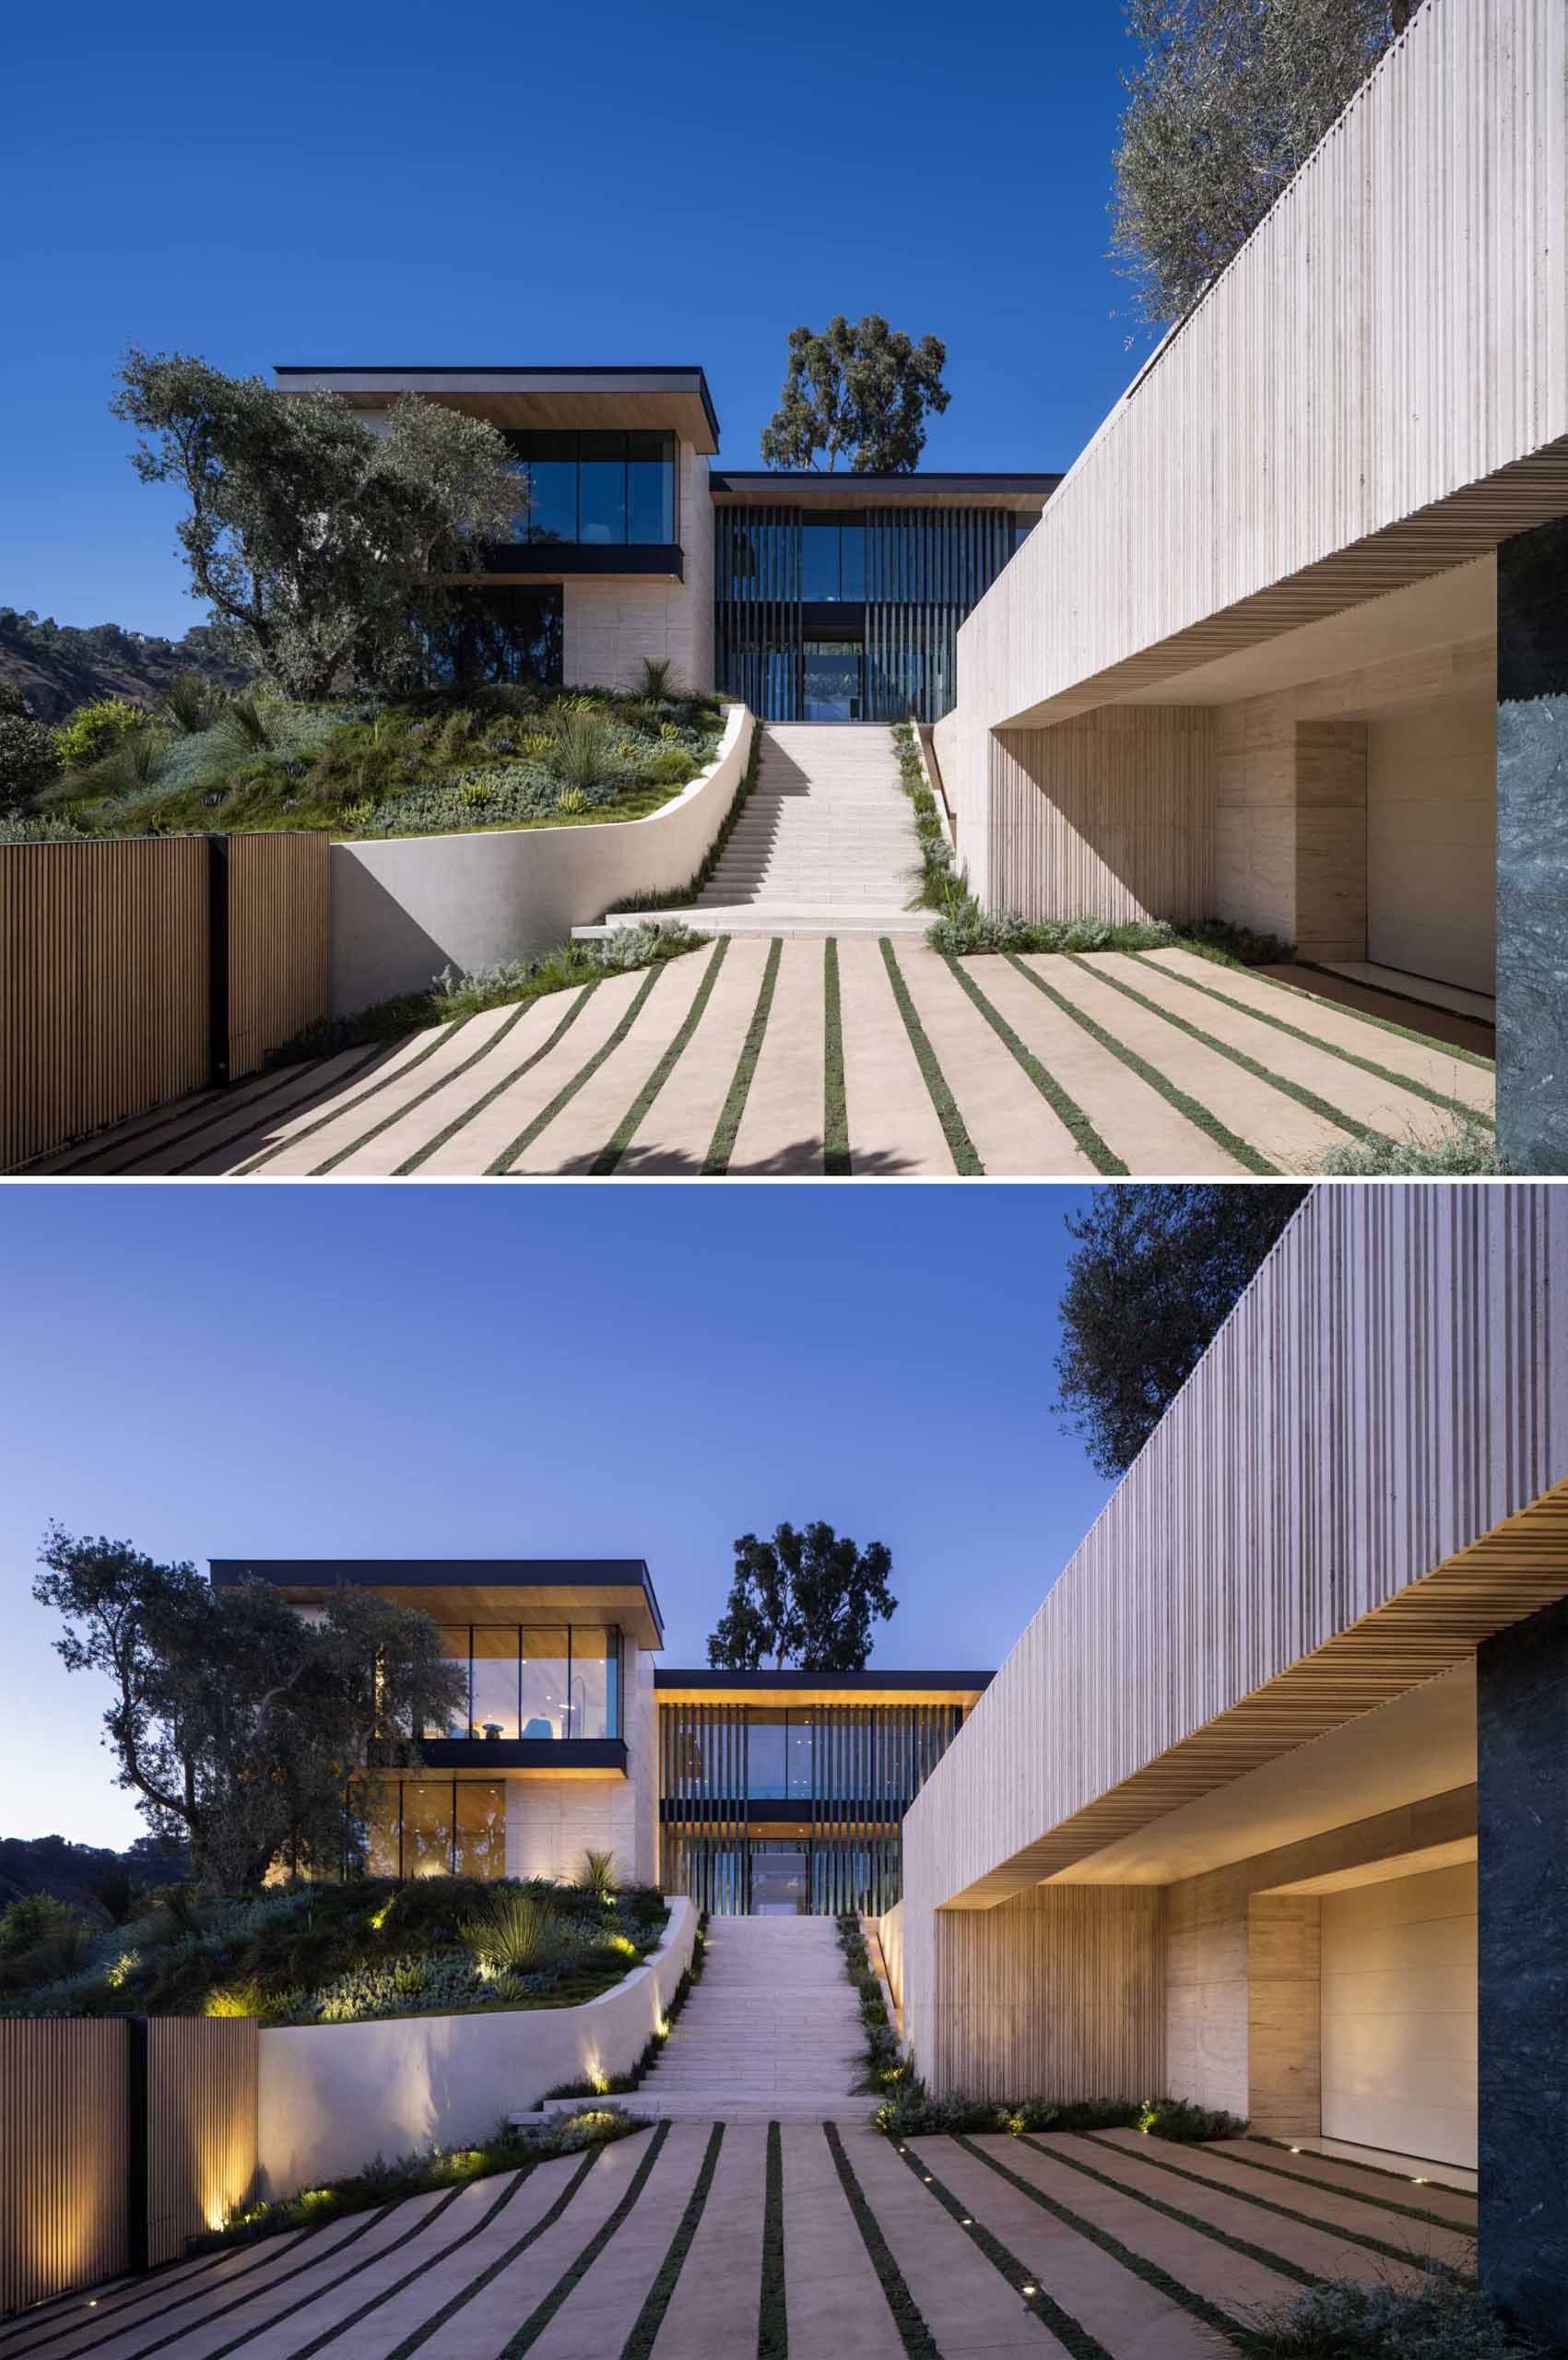 Outdoor lighting highlights the design features and landscaping of this house.